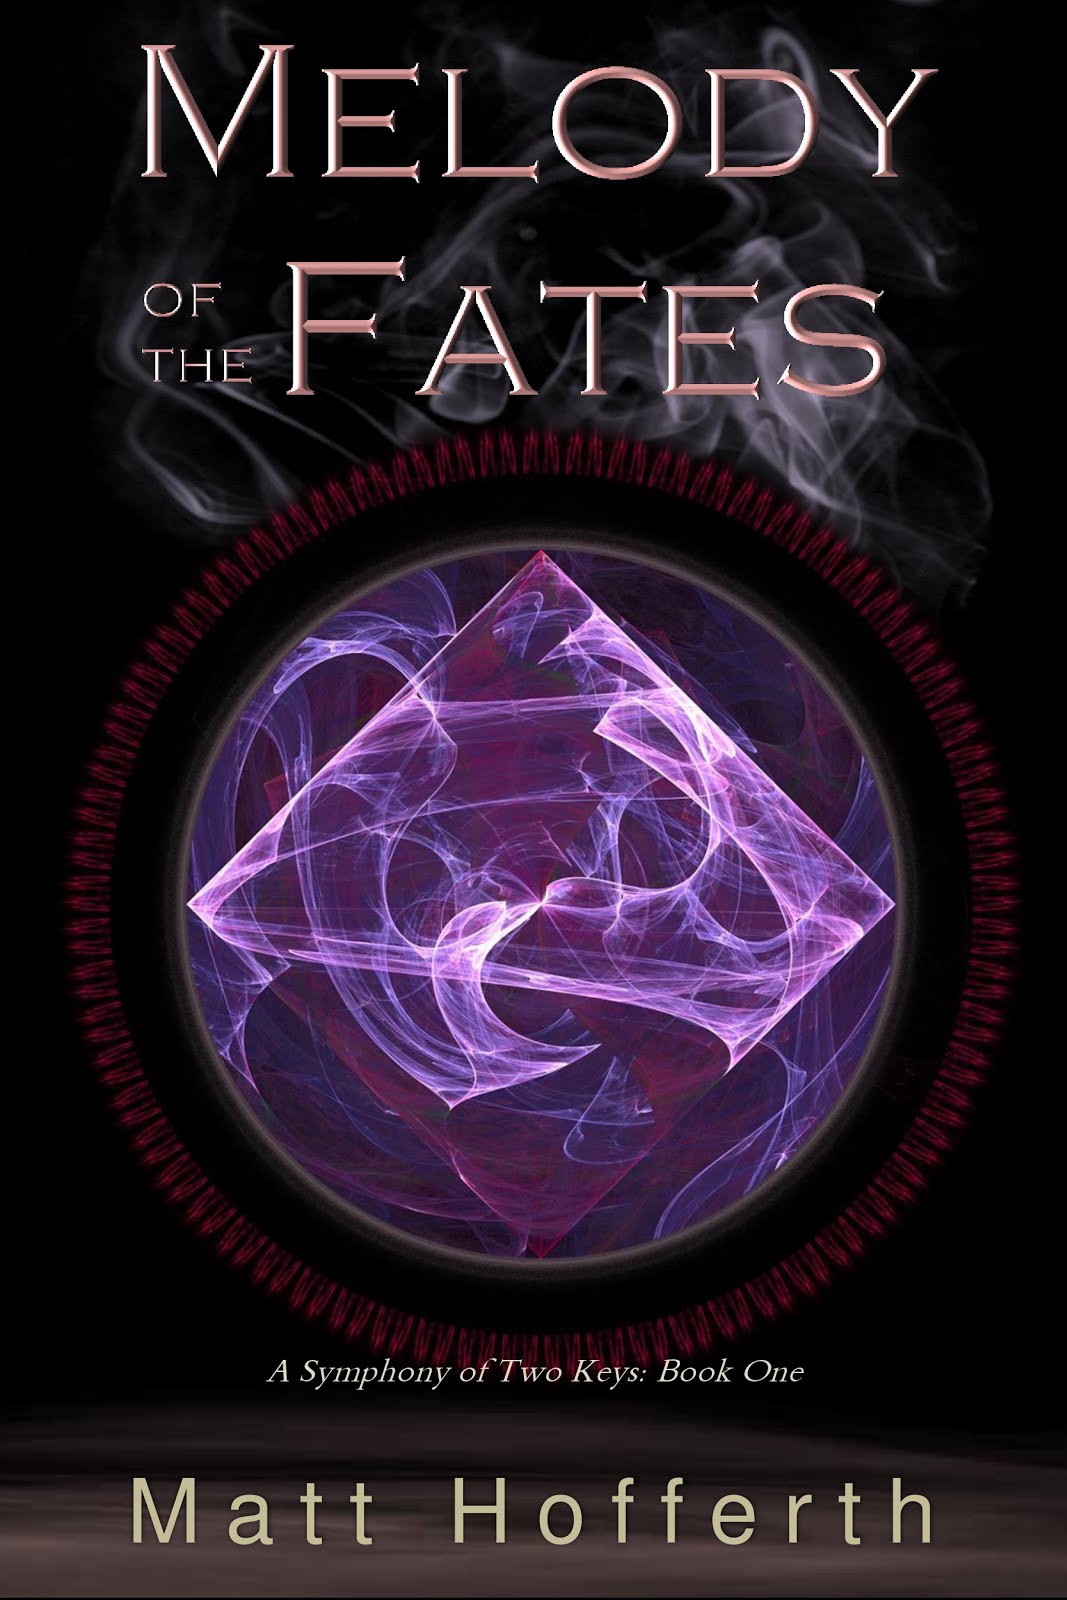 Melody of the Fates